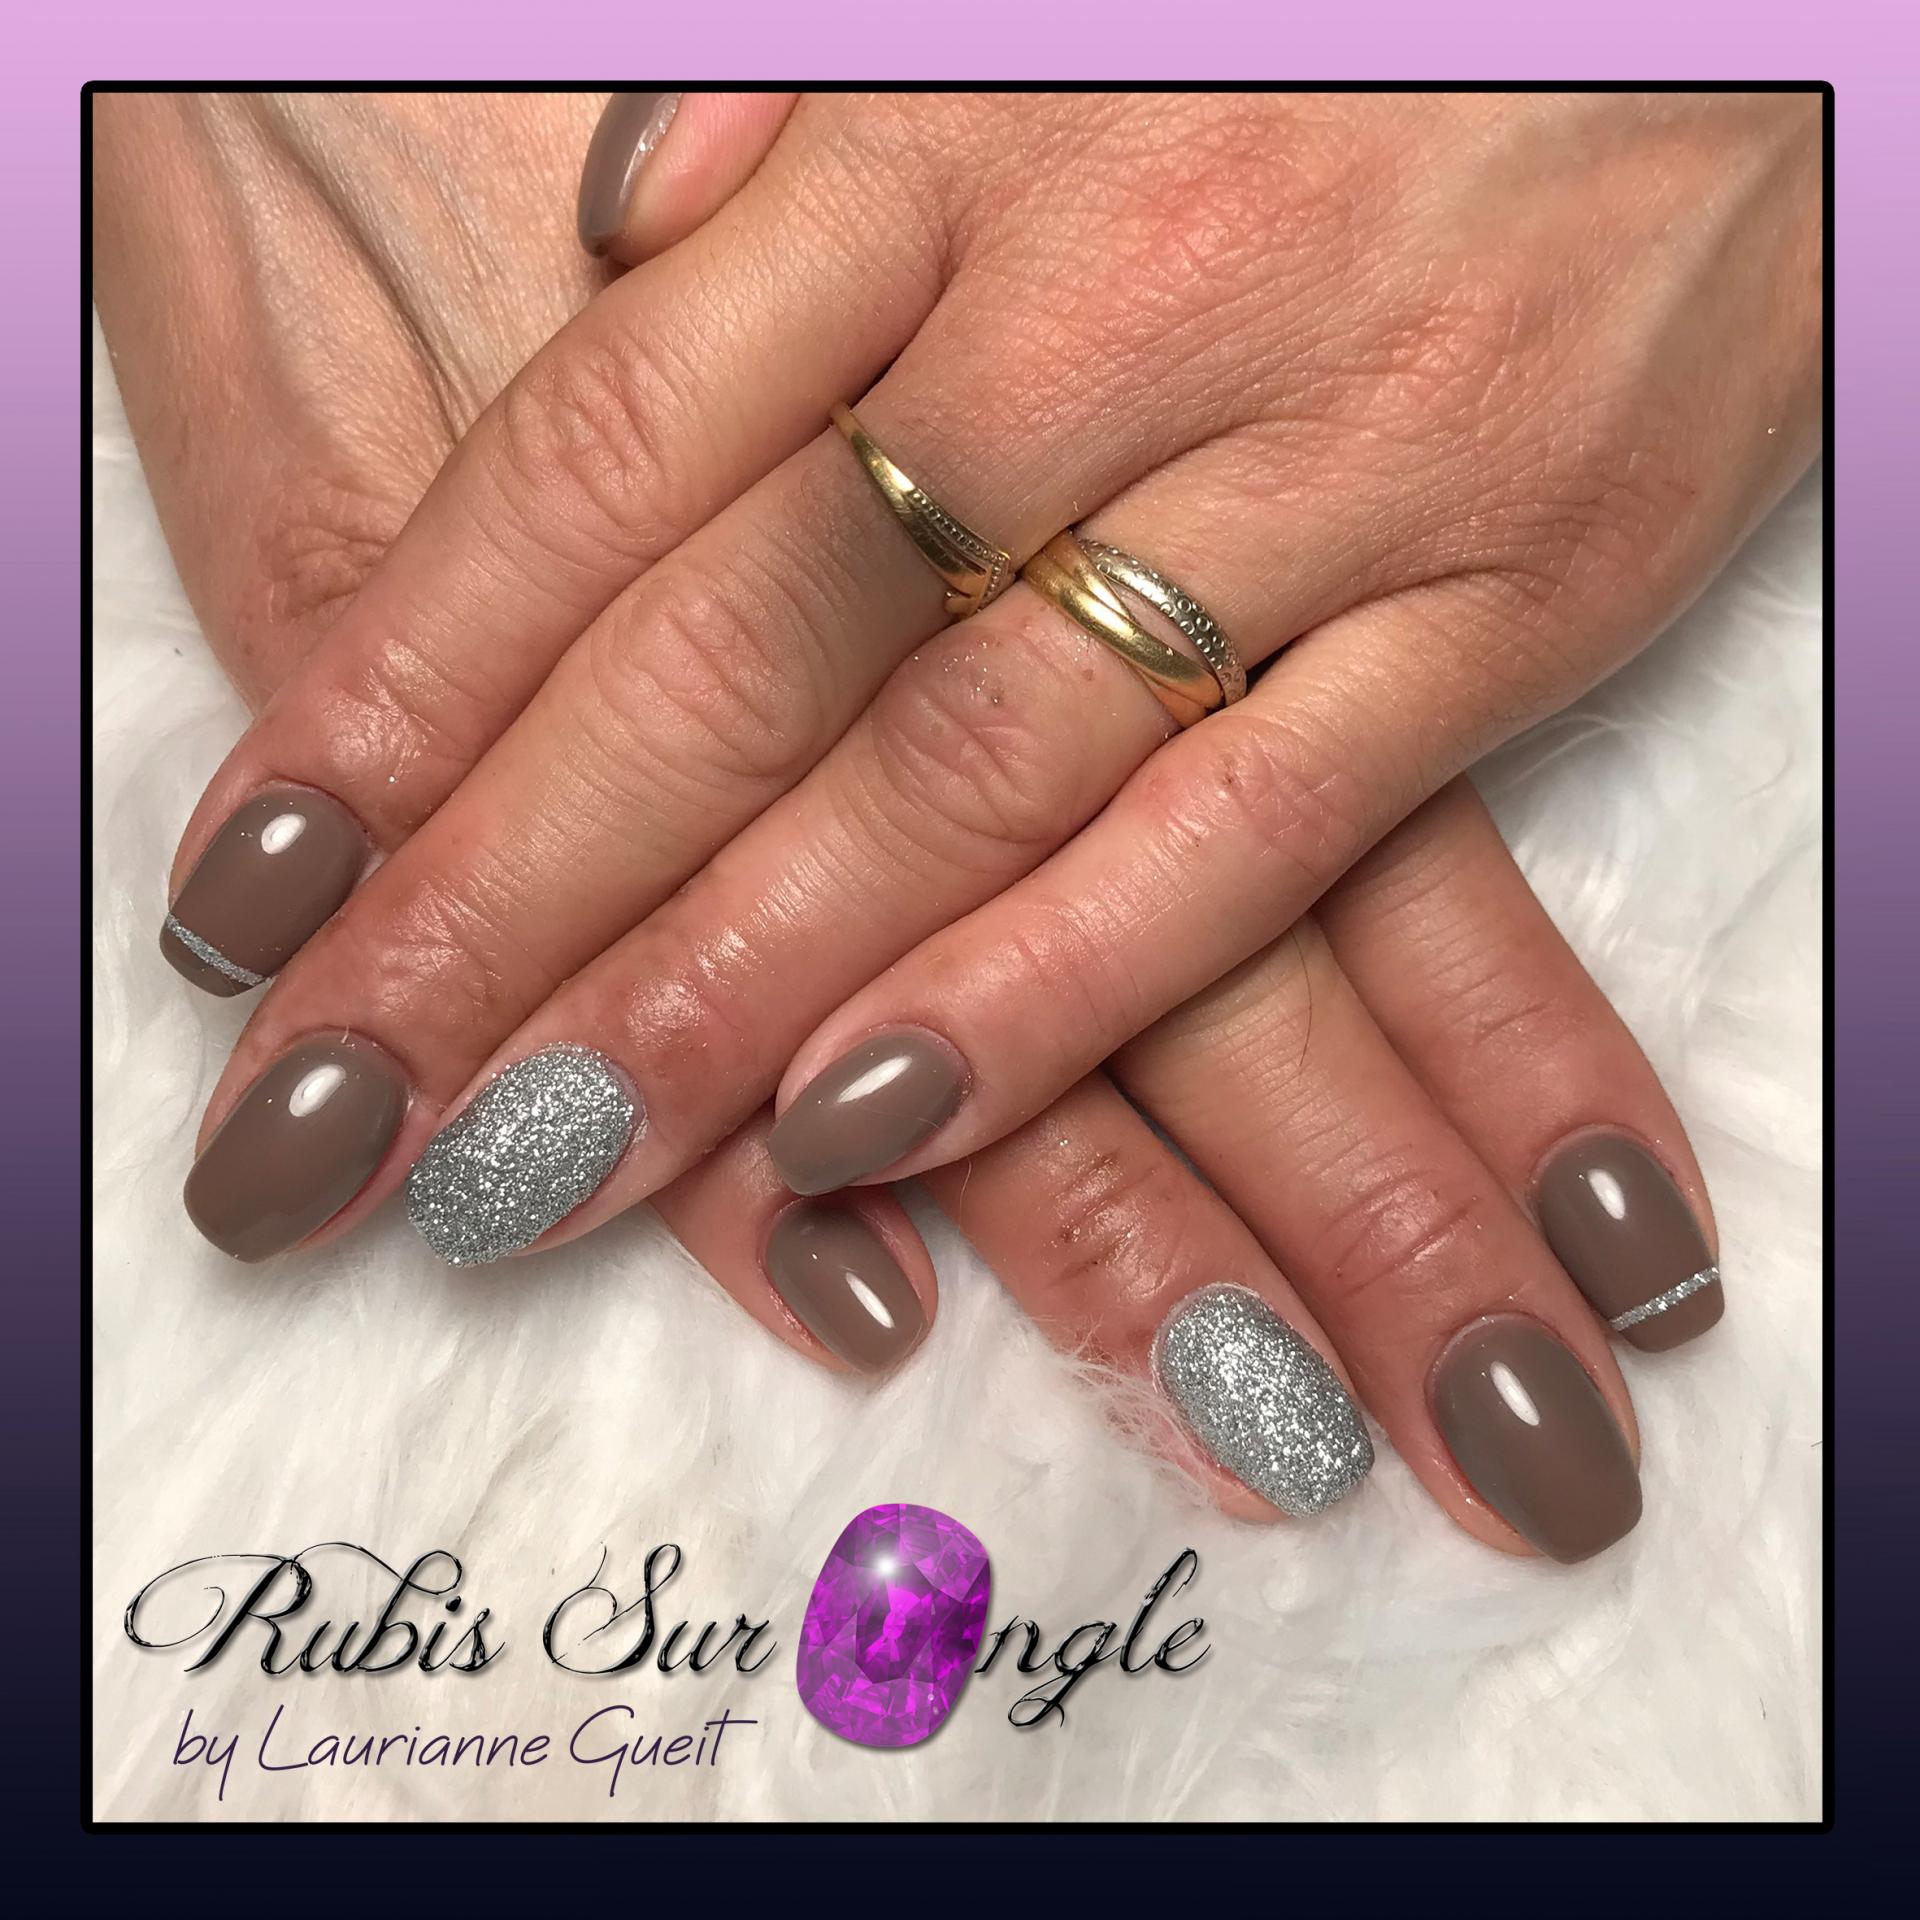 Rubis-Sur-Ongle-Nail-Art-Taupe-Argent-Effet-Sucre